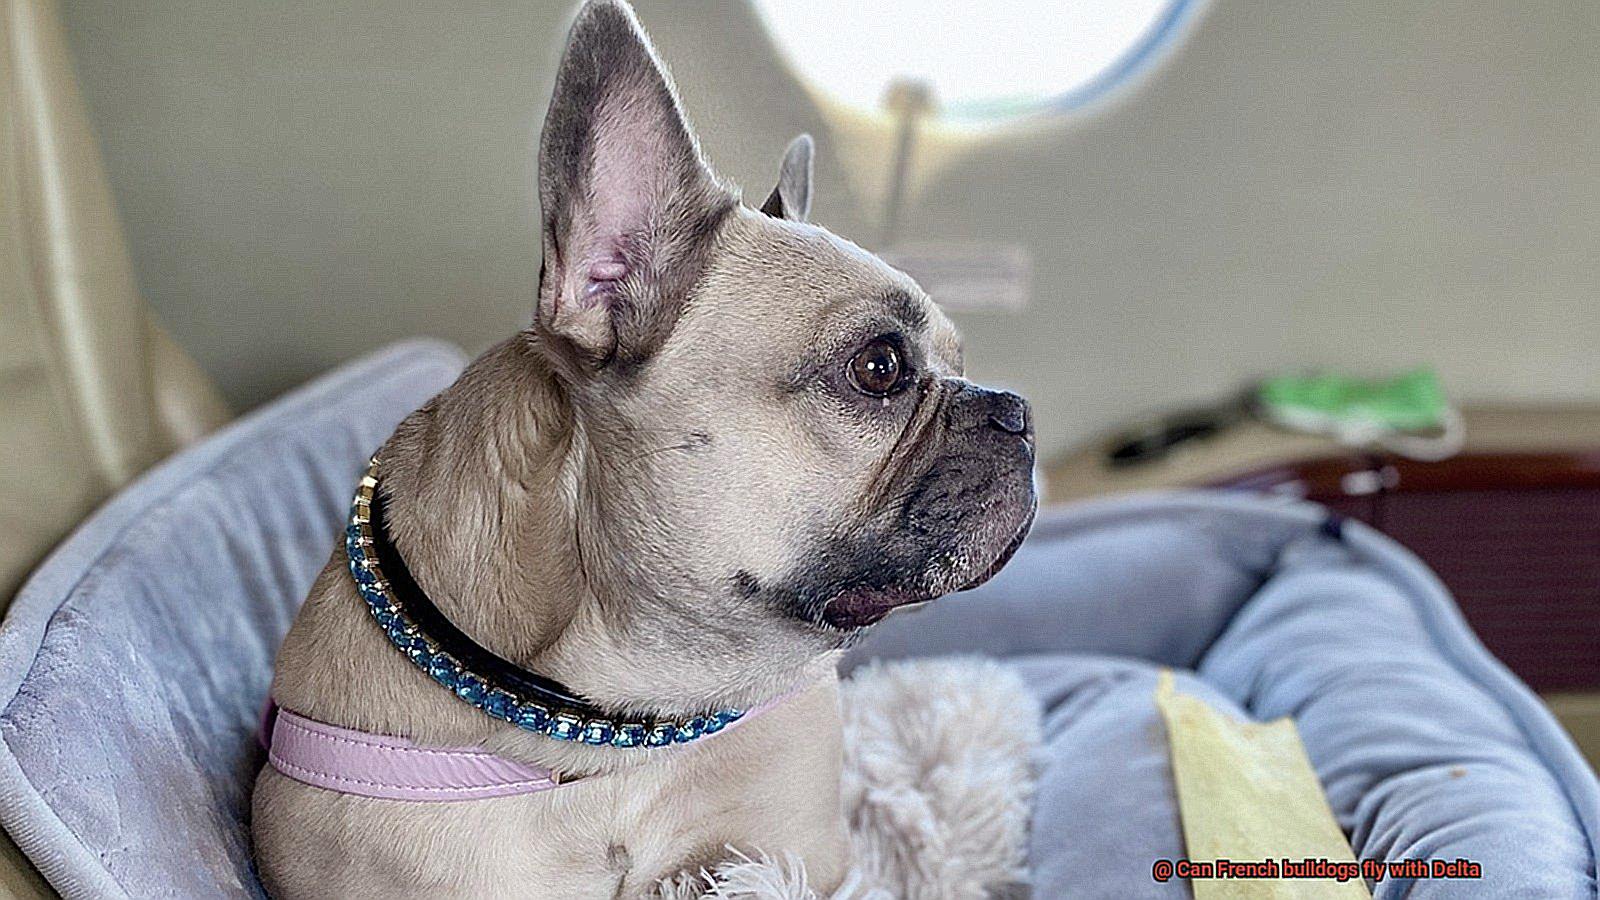 Can French bulldogs fly with Delta-4